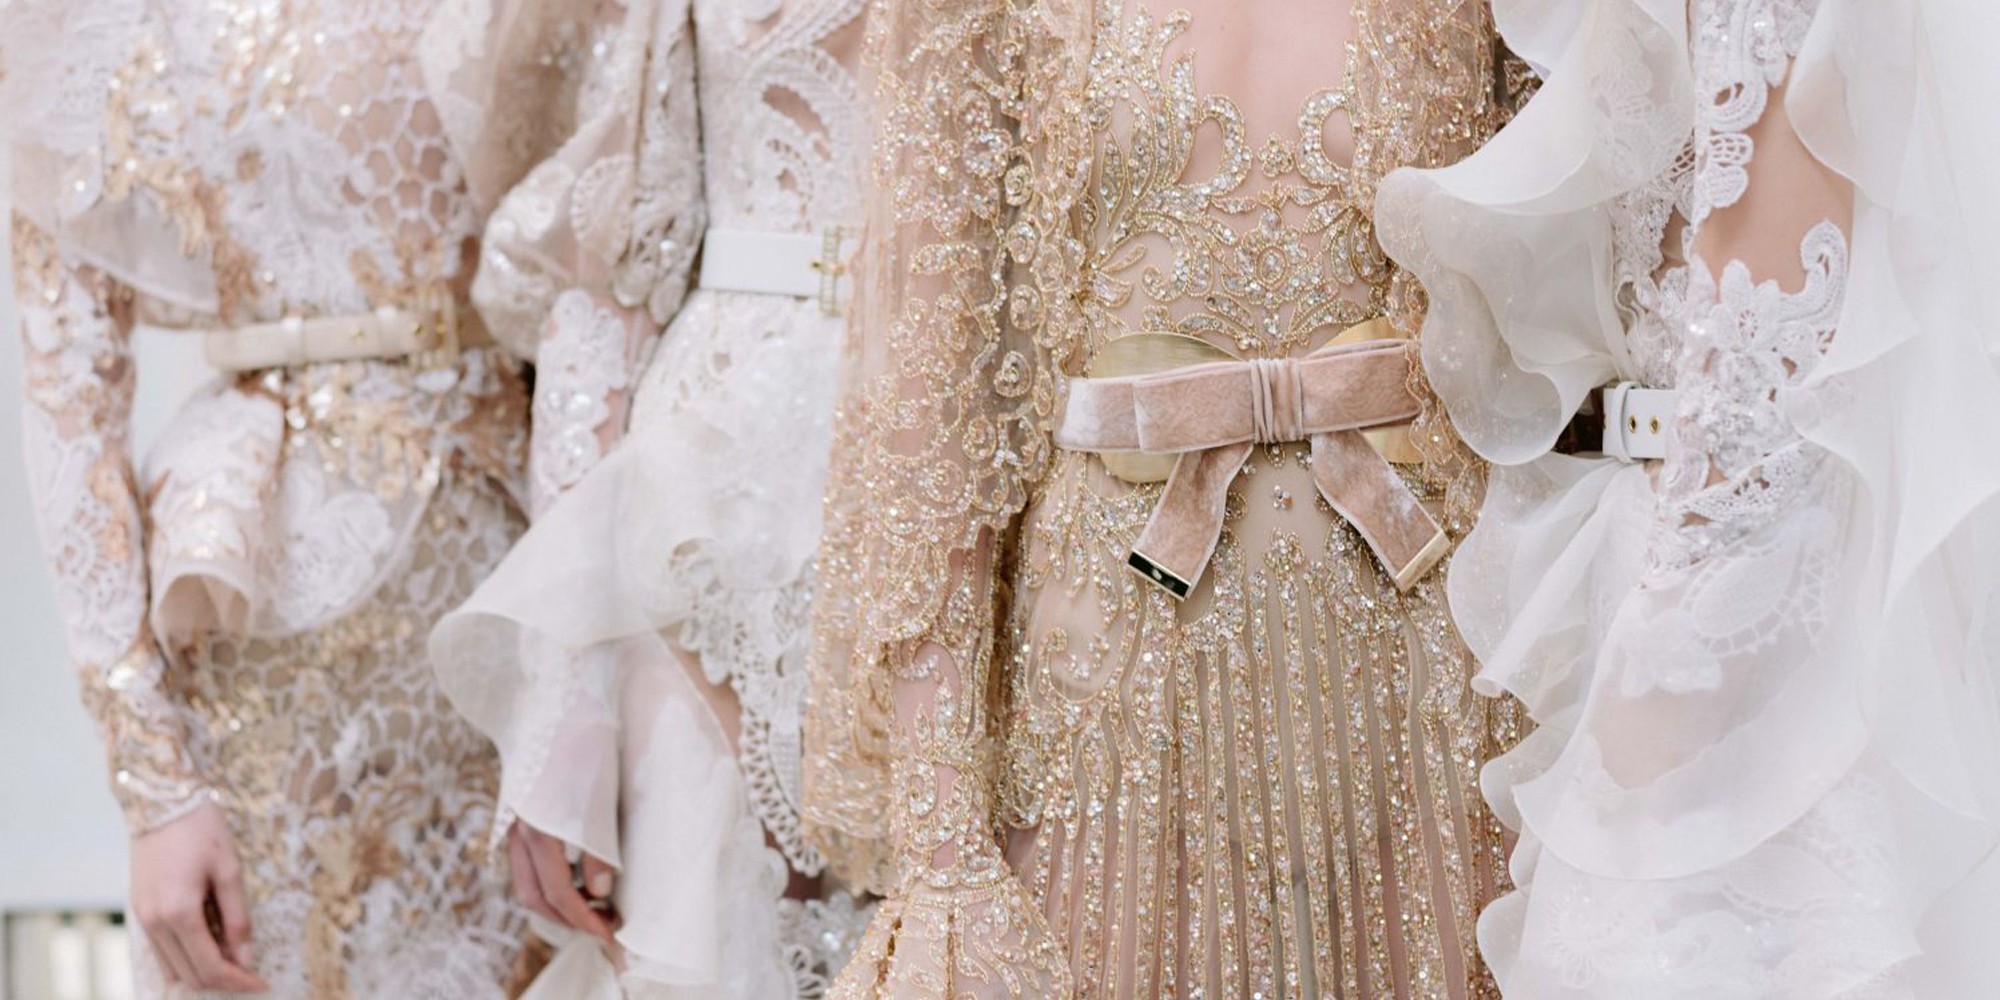 ELIE SAAB SPRING 2020 HAUTE COUTURE COLLECTION